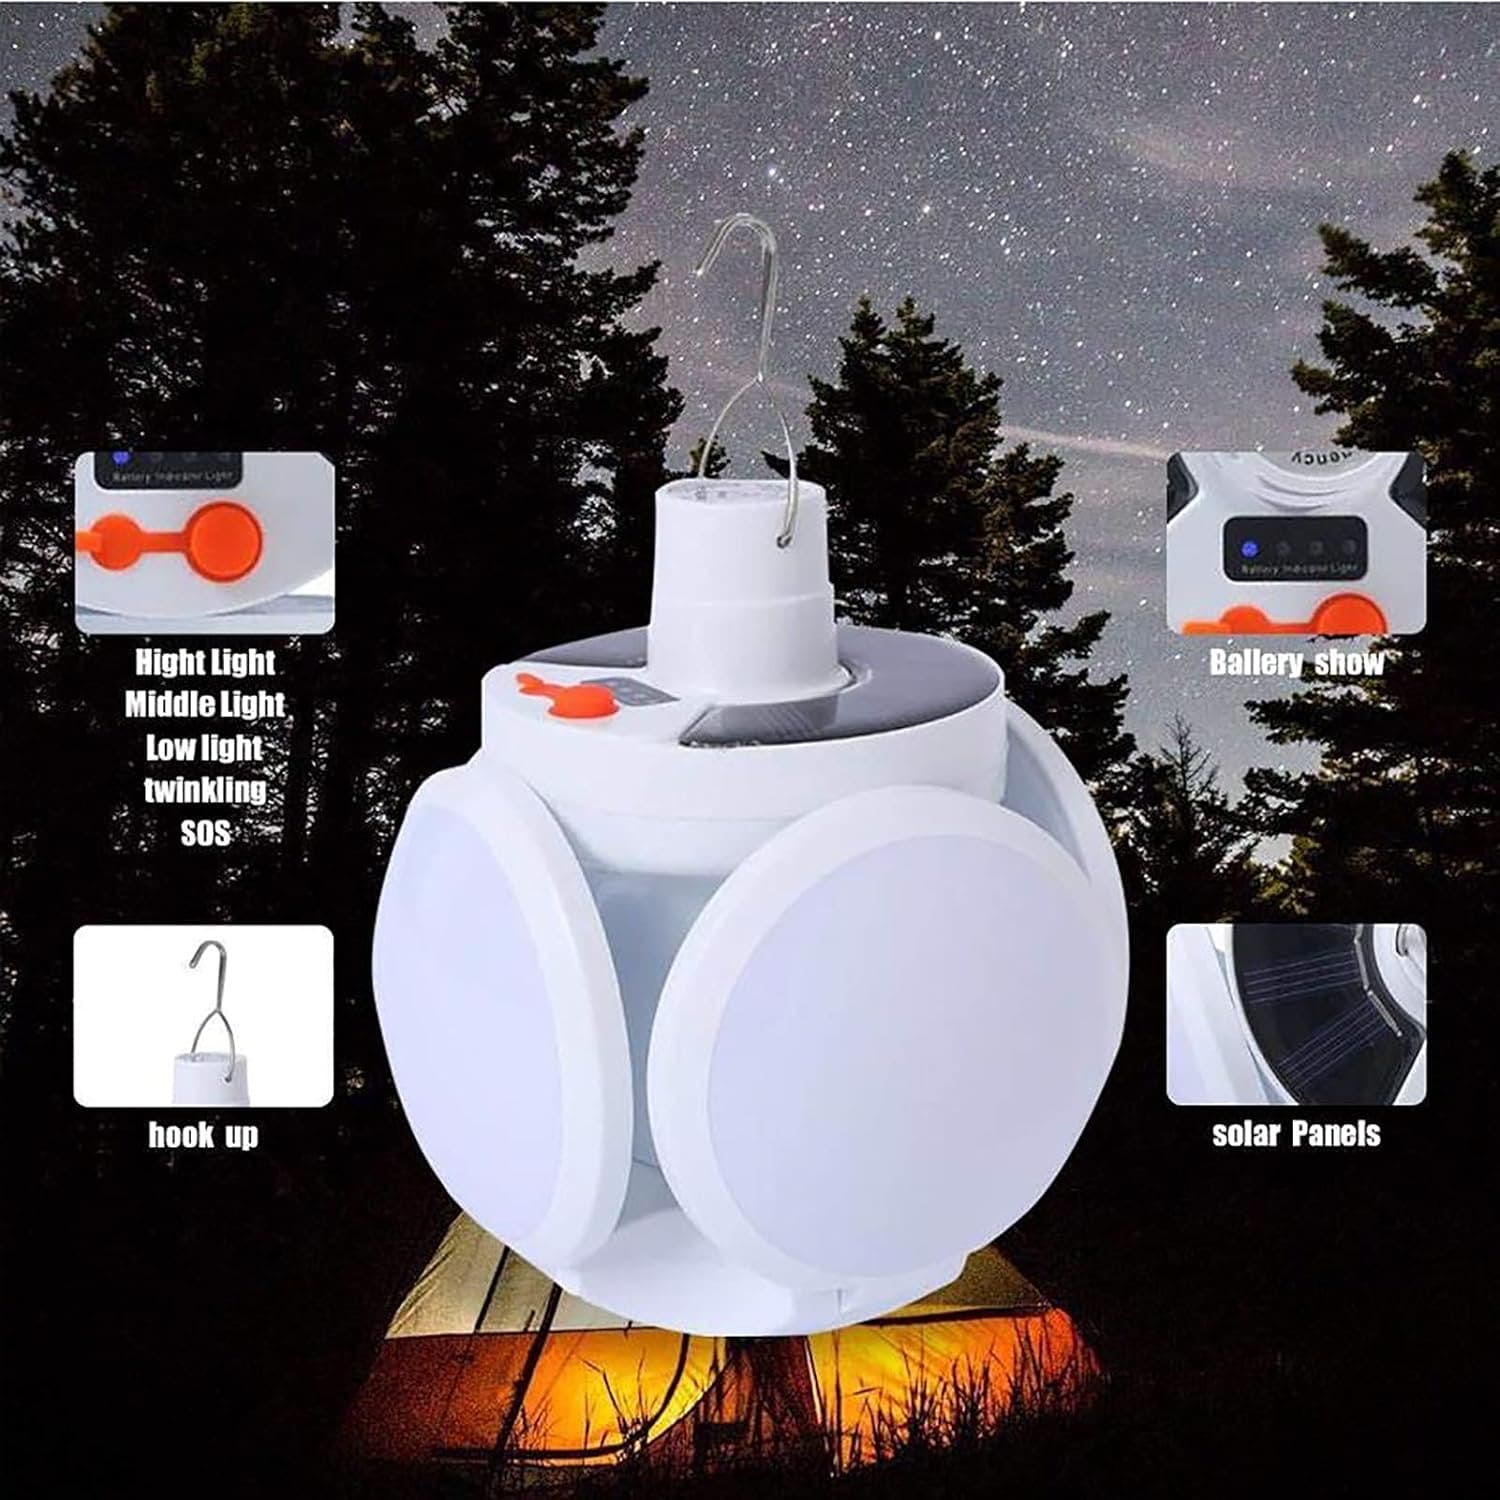 Football Foldable Solar Light, Emergency Home Camping Night Lights, Portable USB Rechargeable LED Search Light, 2 In 1 Camping Light, Portable Tent Lamp with Hanging Hook